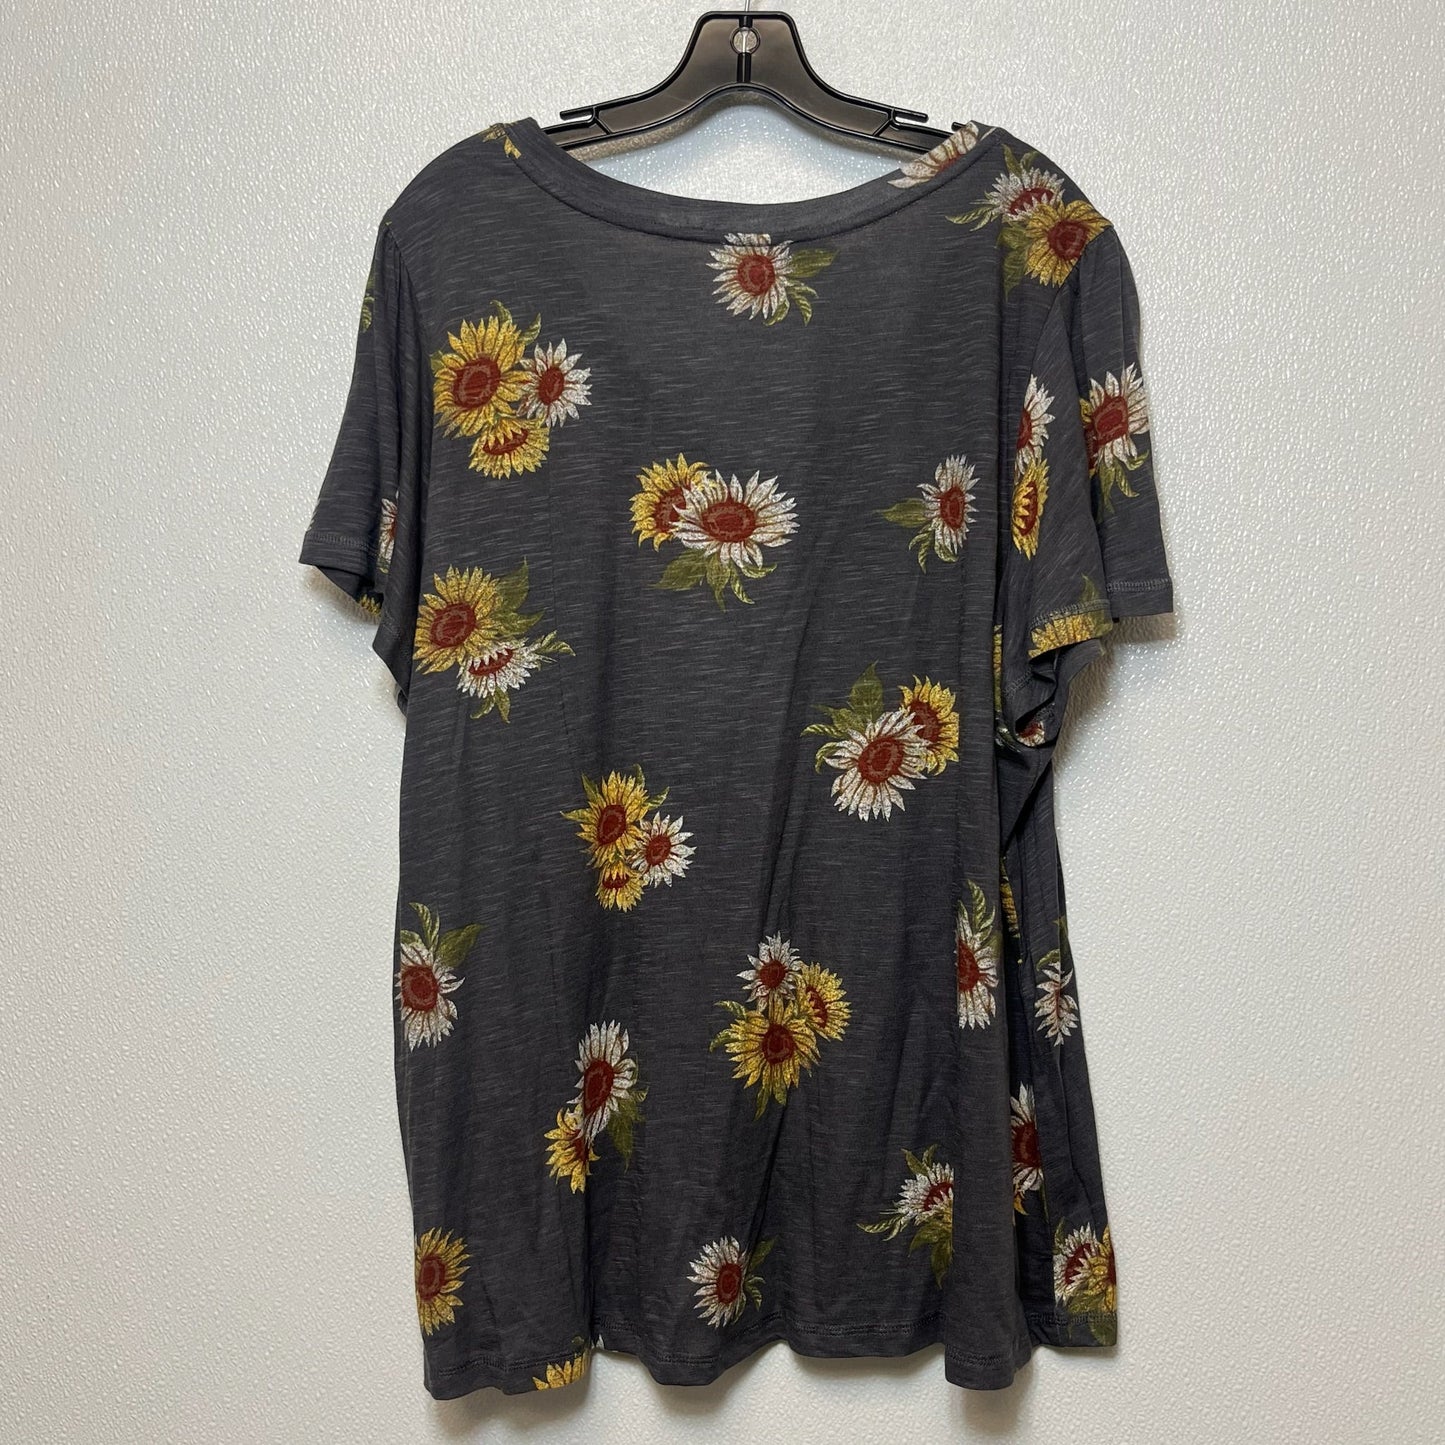 Floral Top Short Sleeve Maurices, Size 2